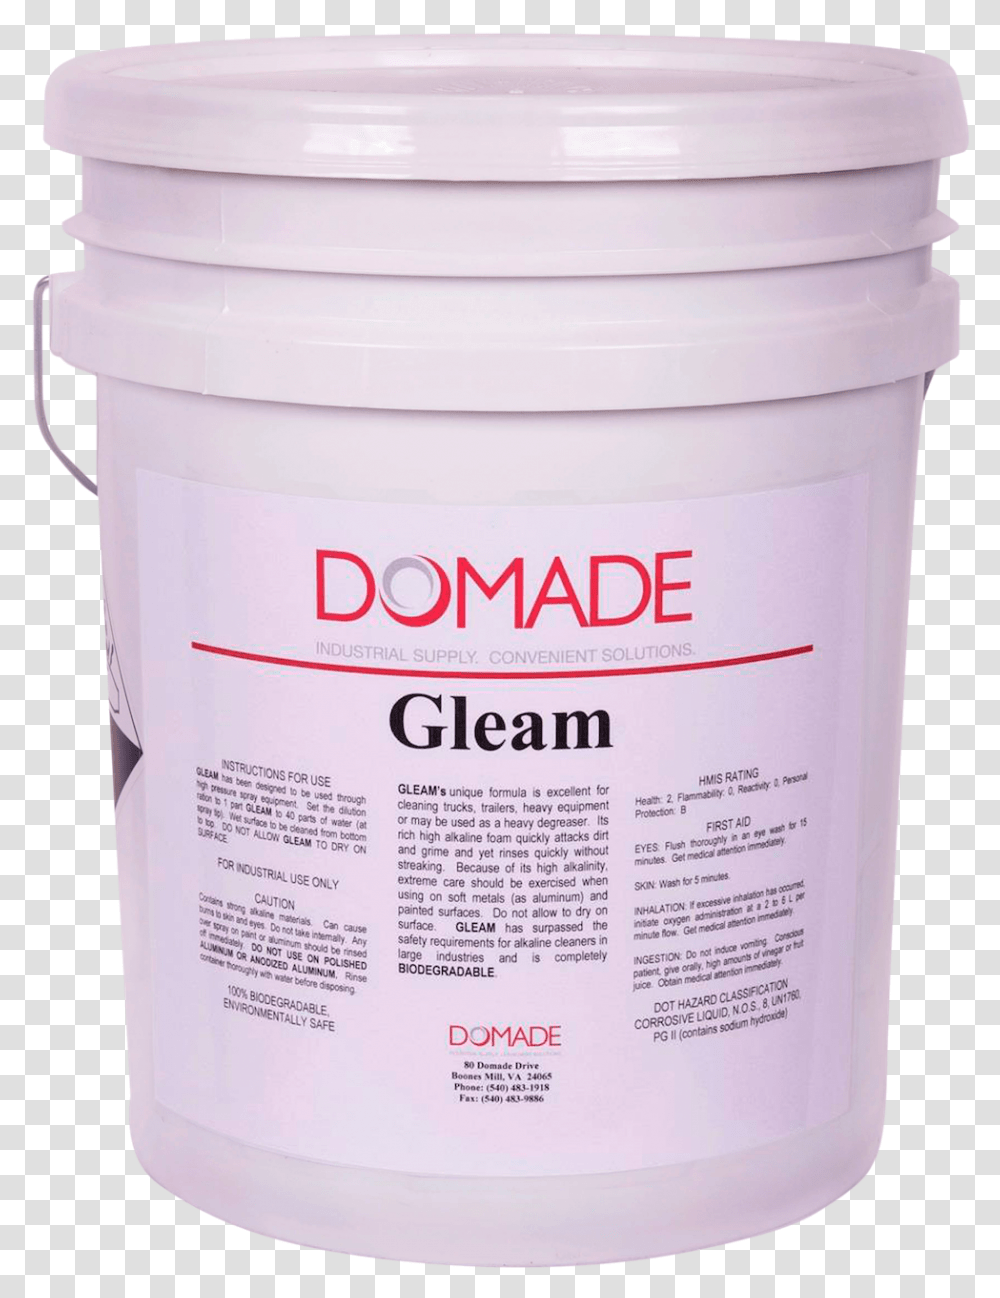 Gleam Hd Alkaline Dunamis, Paint Container, Bucket, Mailbox, Letterbox Transparent Png